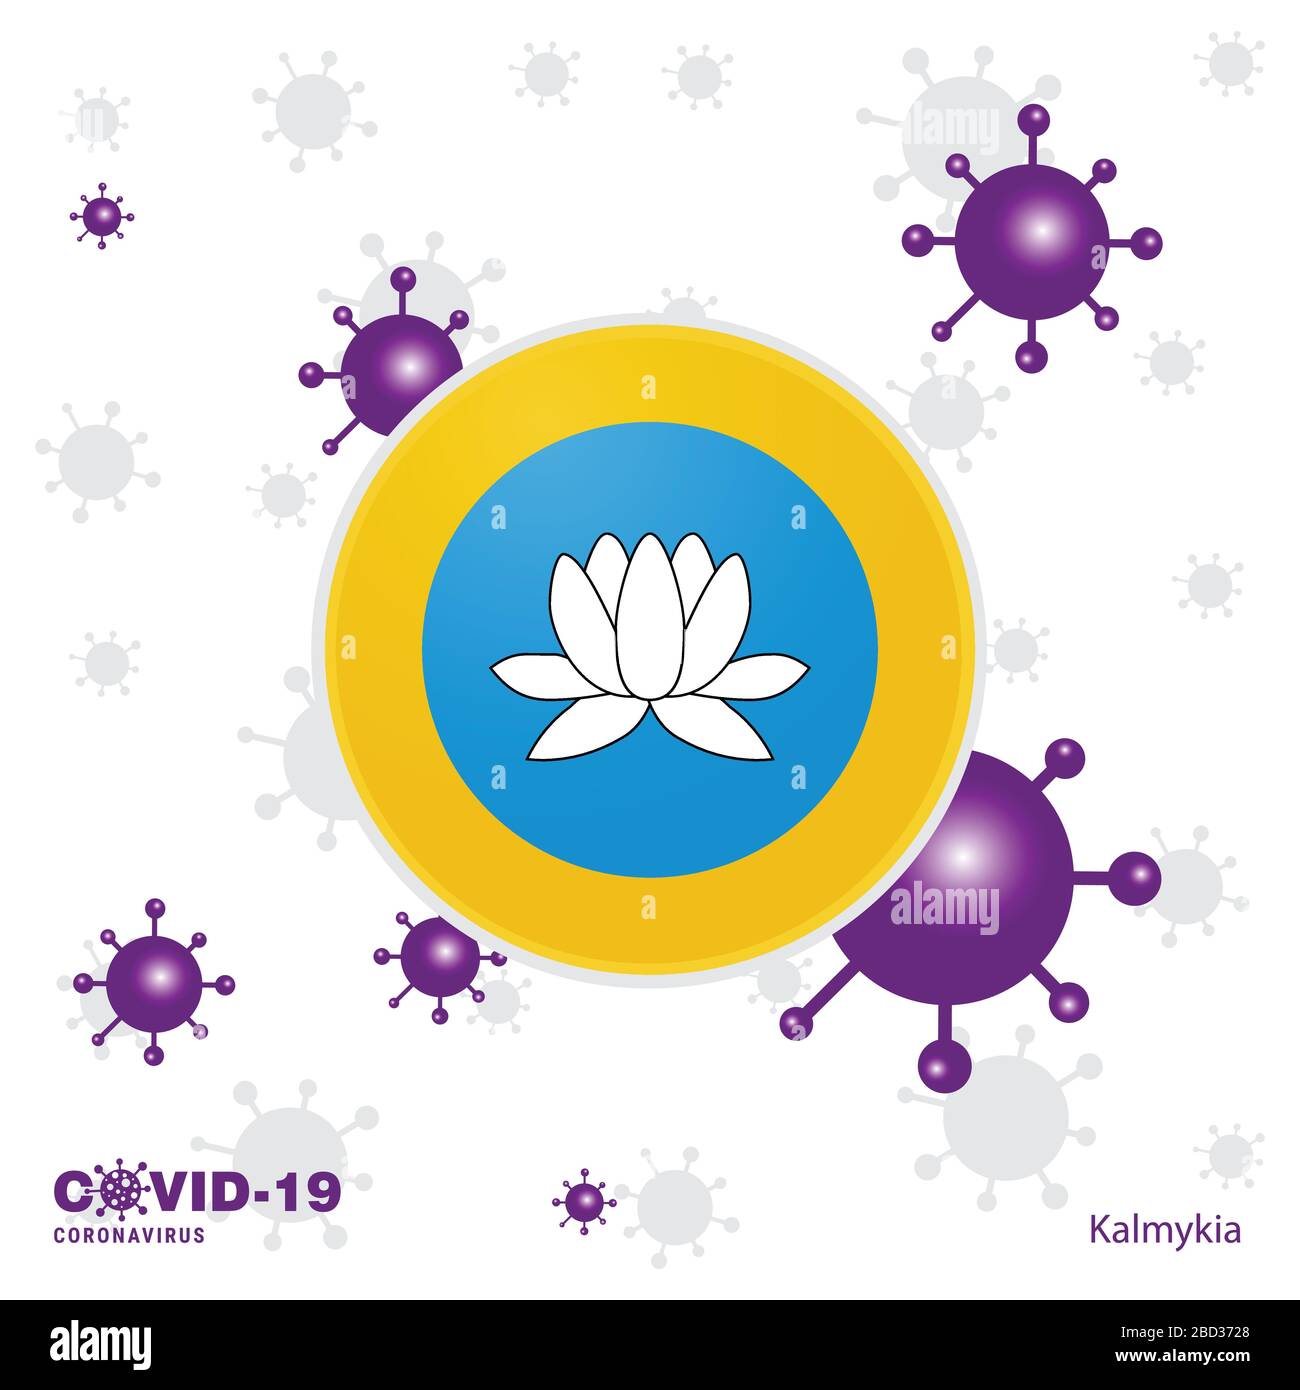 Pray For Kalmykia. COVID-19 Coronavirus Typography Flag. Stay home, Stay Healthy. Take care of your own health Stock Vector